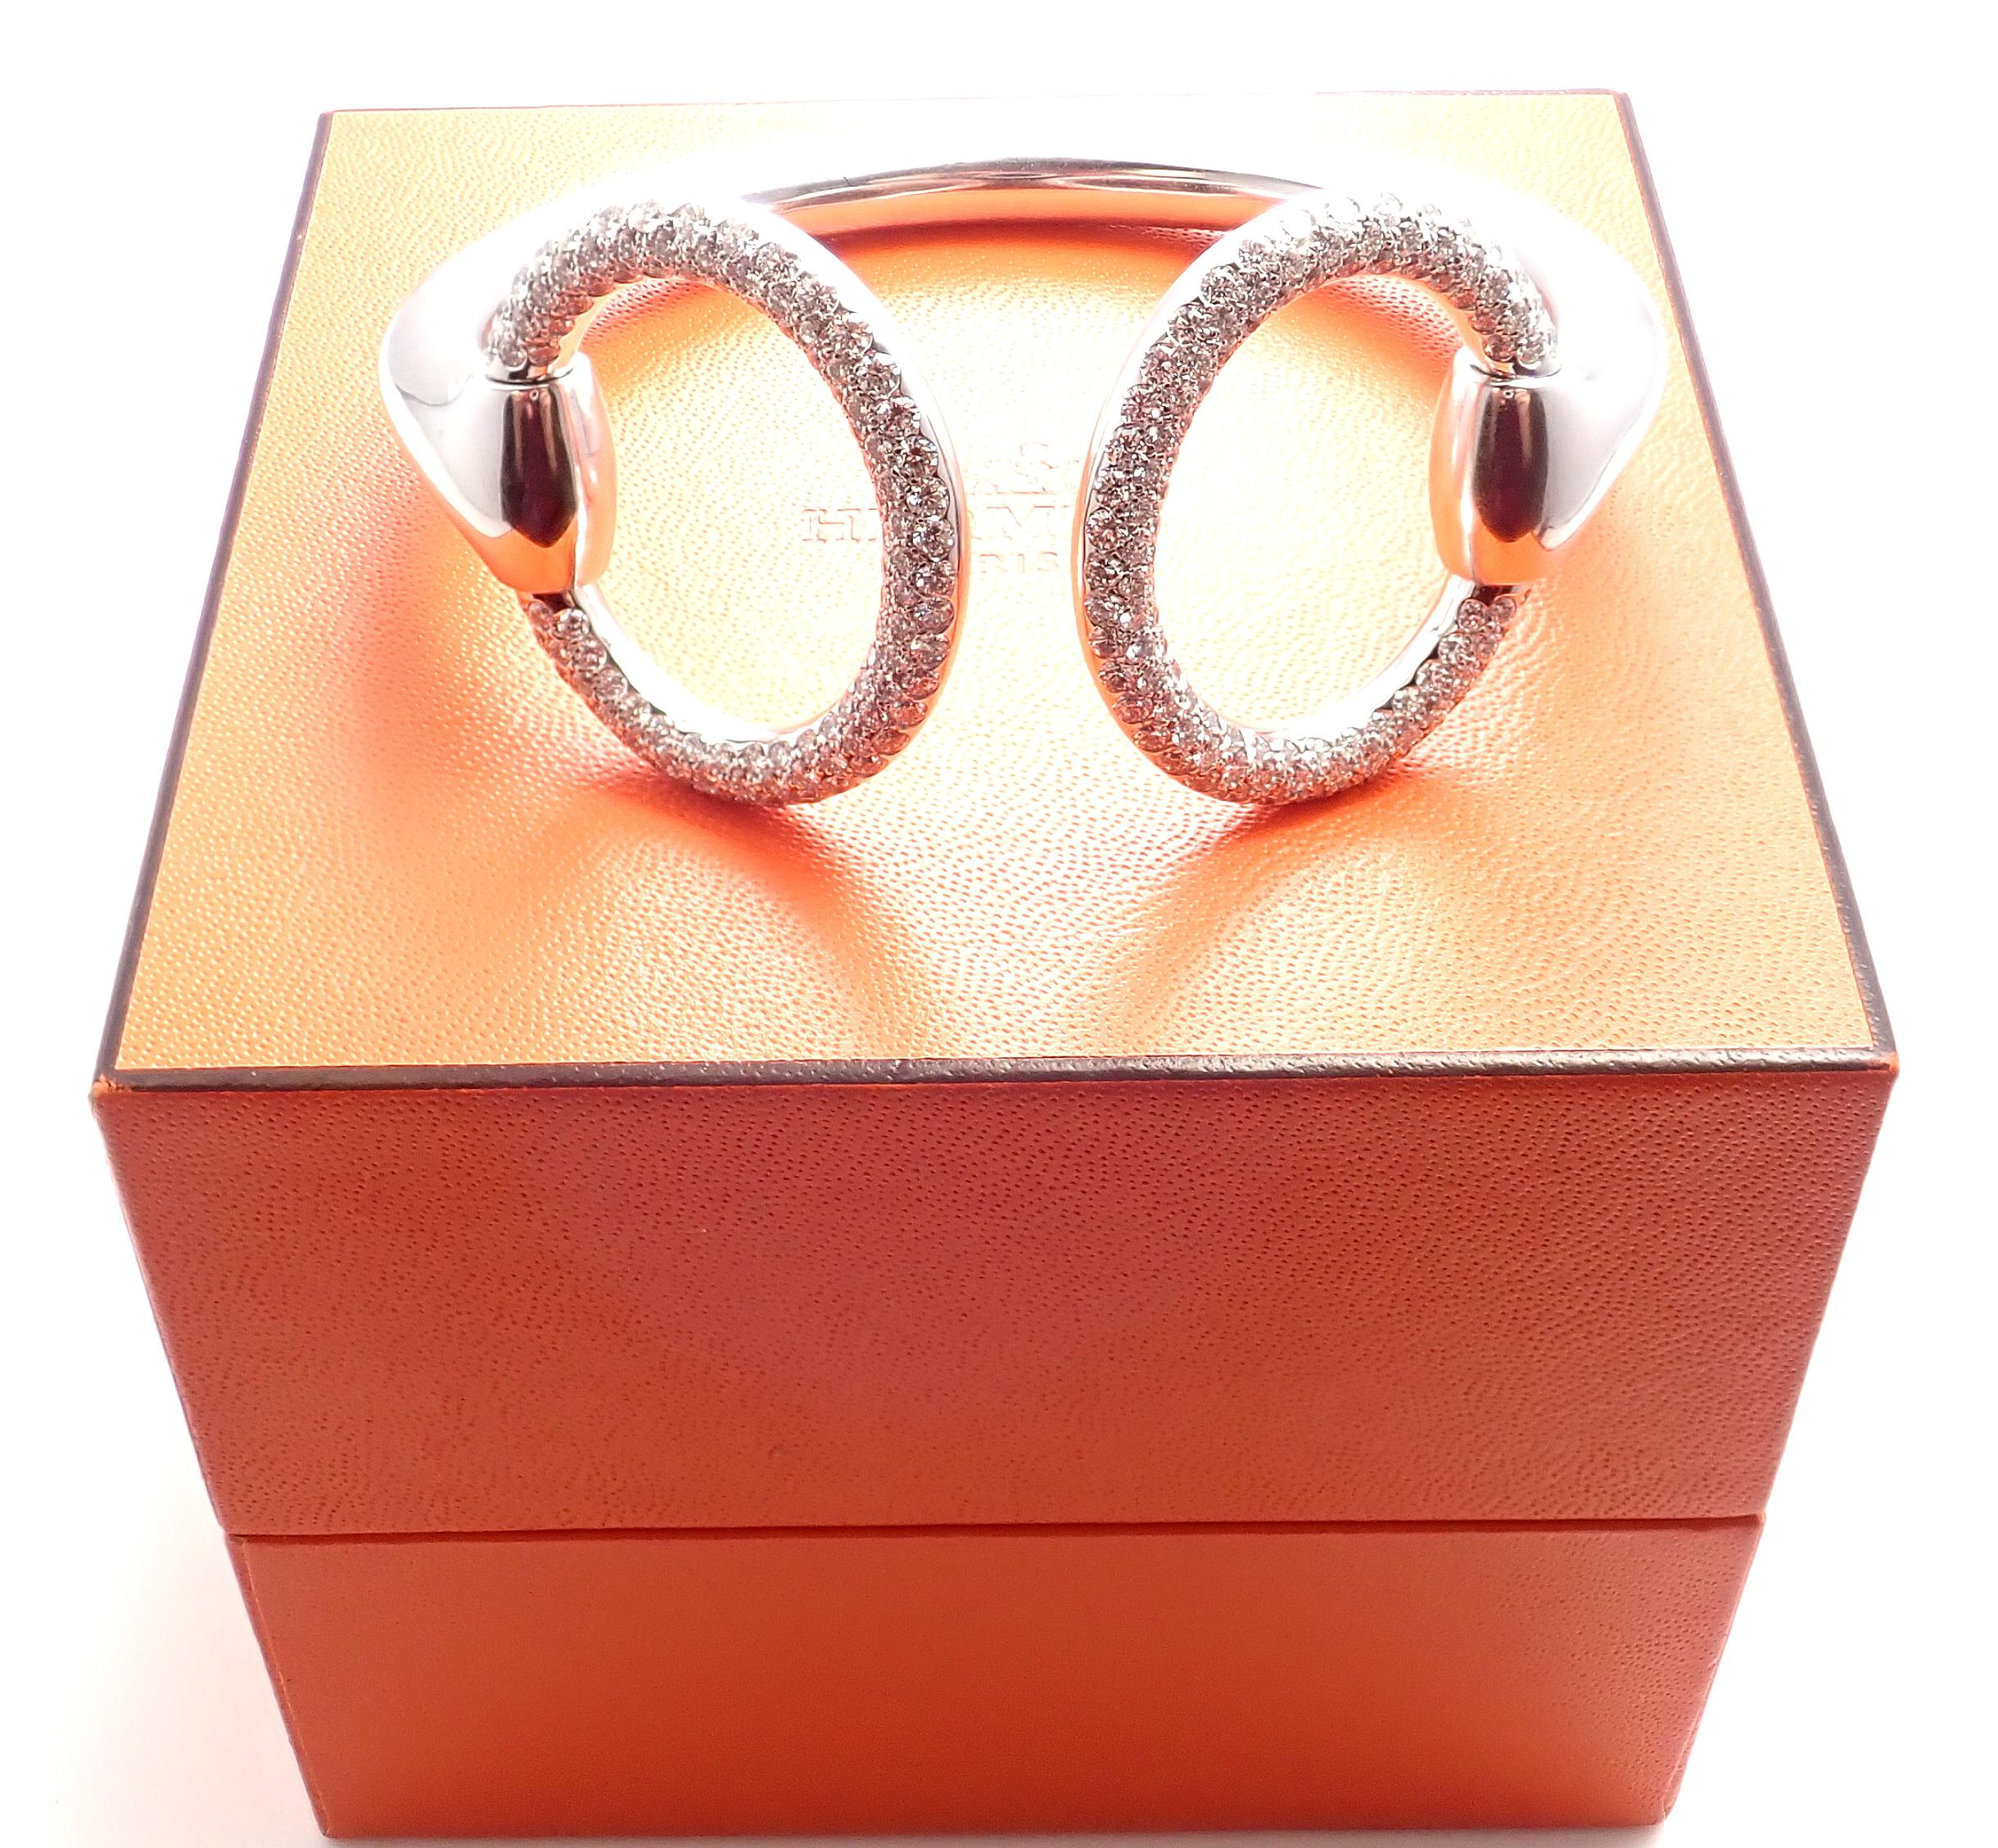 Hermès Nausicaa Diamond Horsebit White Gold Cuff Bangle Bracelet In Excellent Condition For Sale In Holland, PA